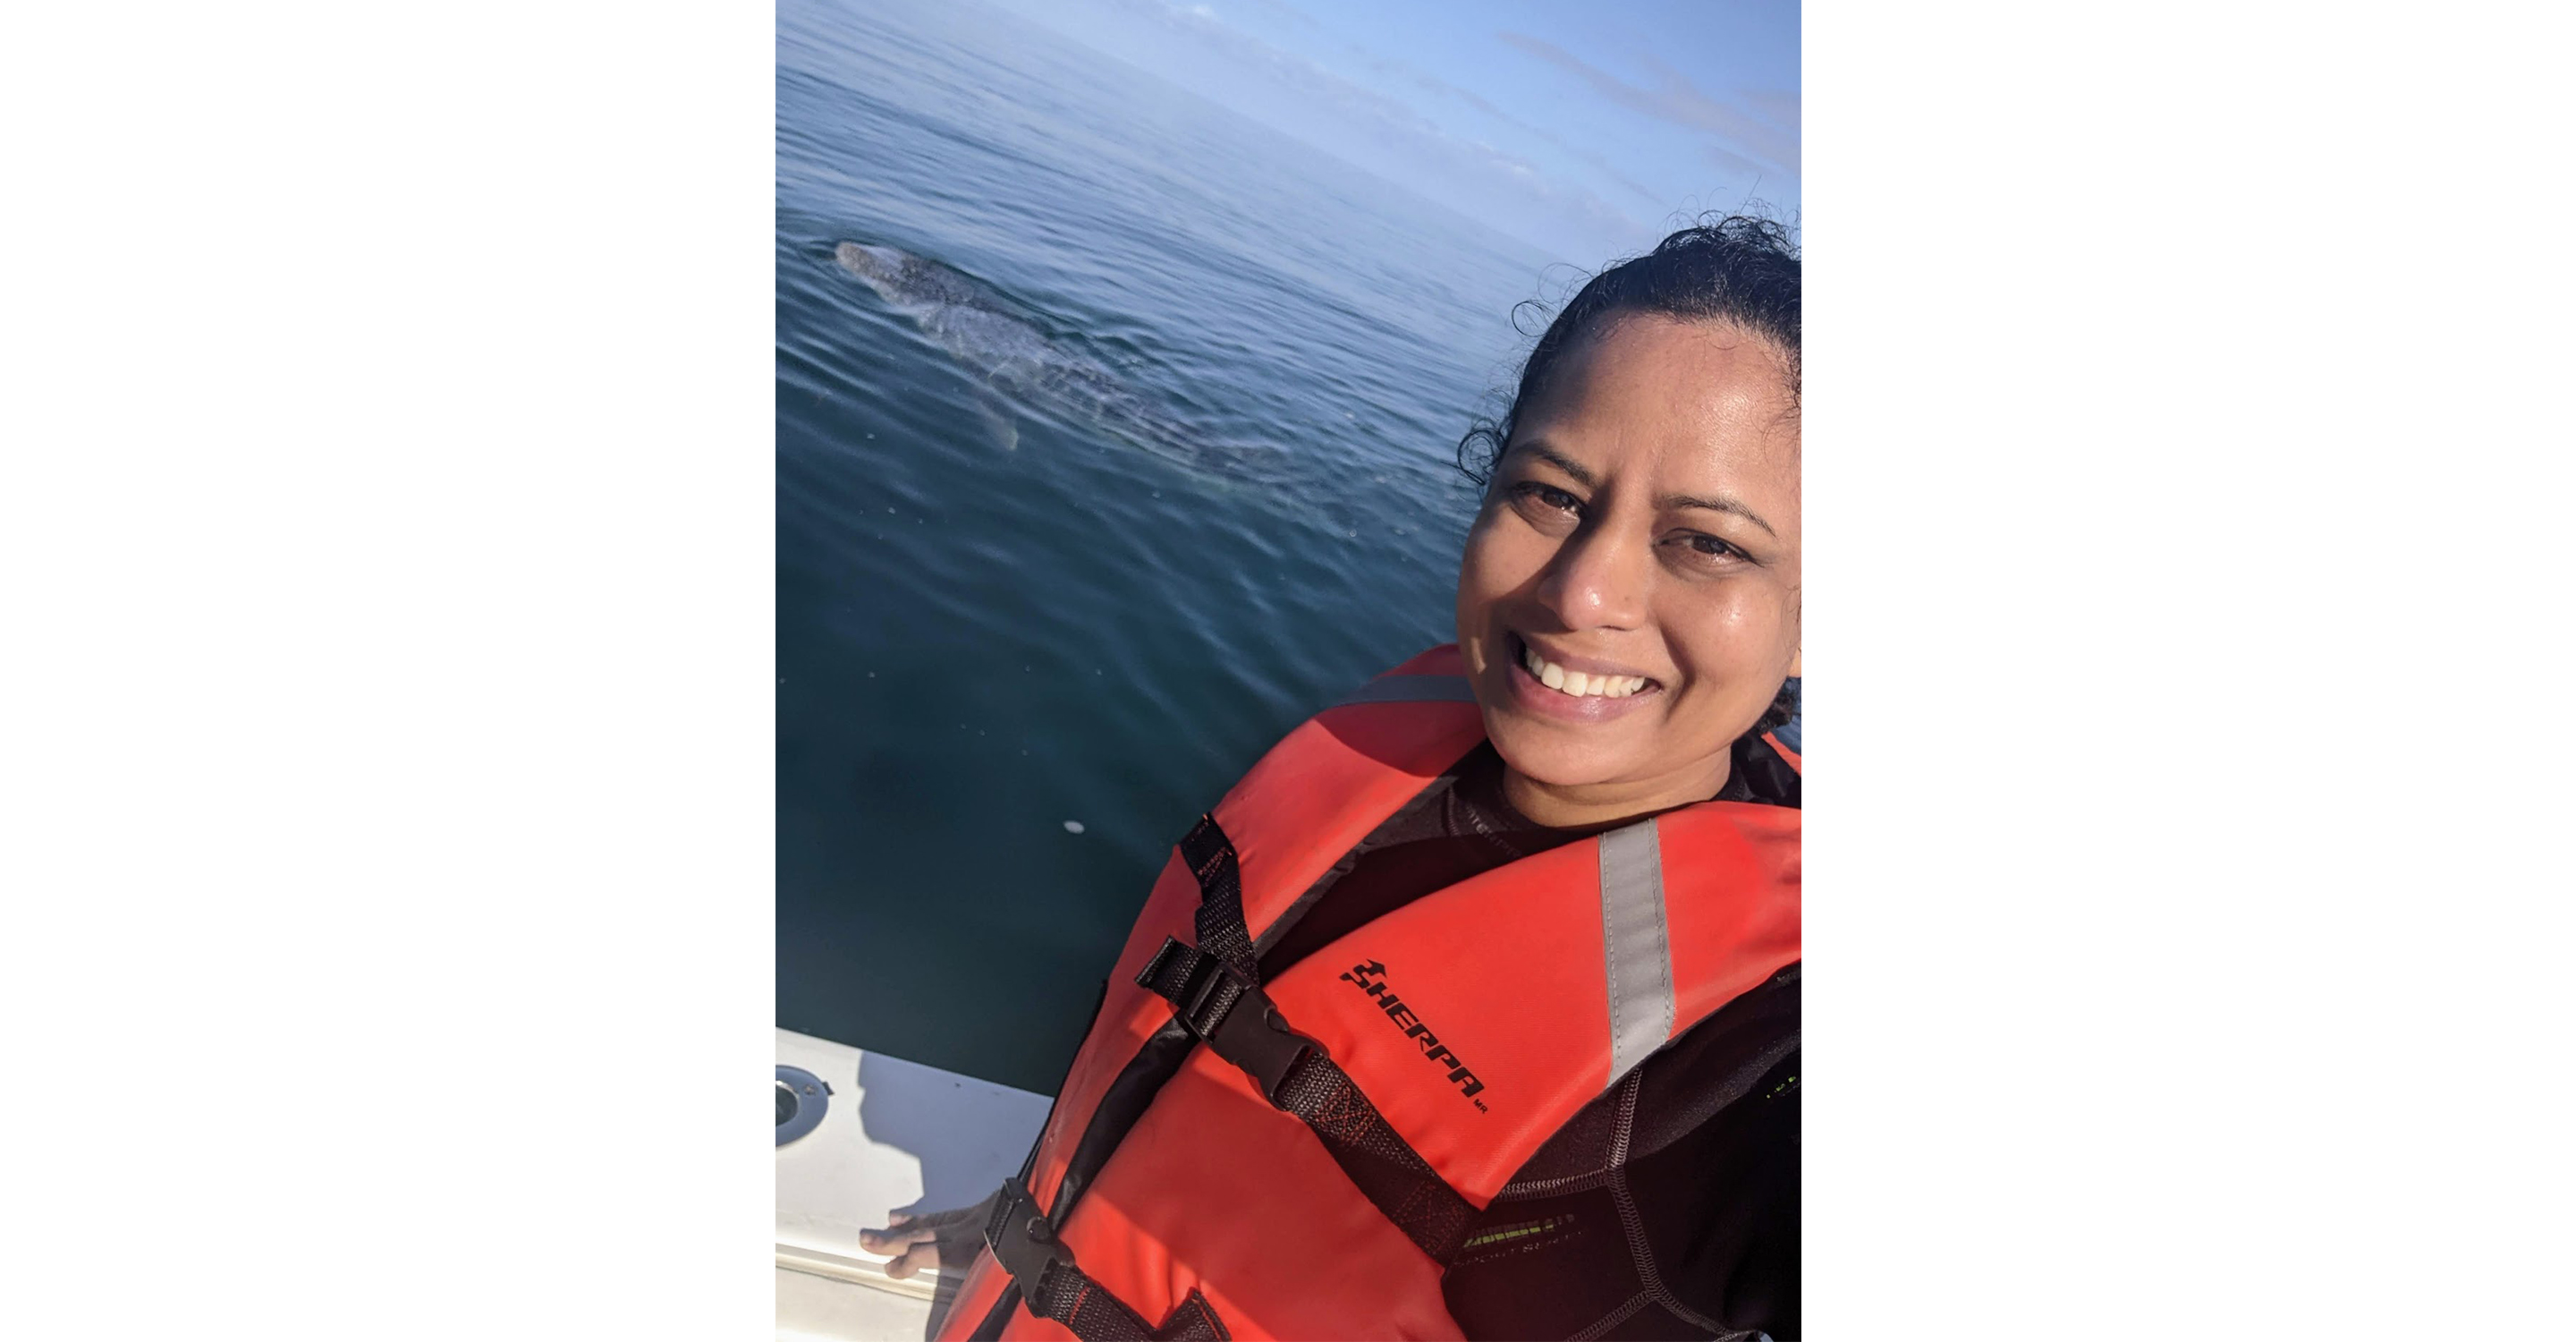 Happiness after fulfilling a long-time dream of swimming with whale sharks, La Paz, Mexico, 2022.